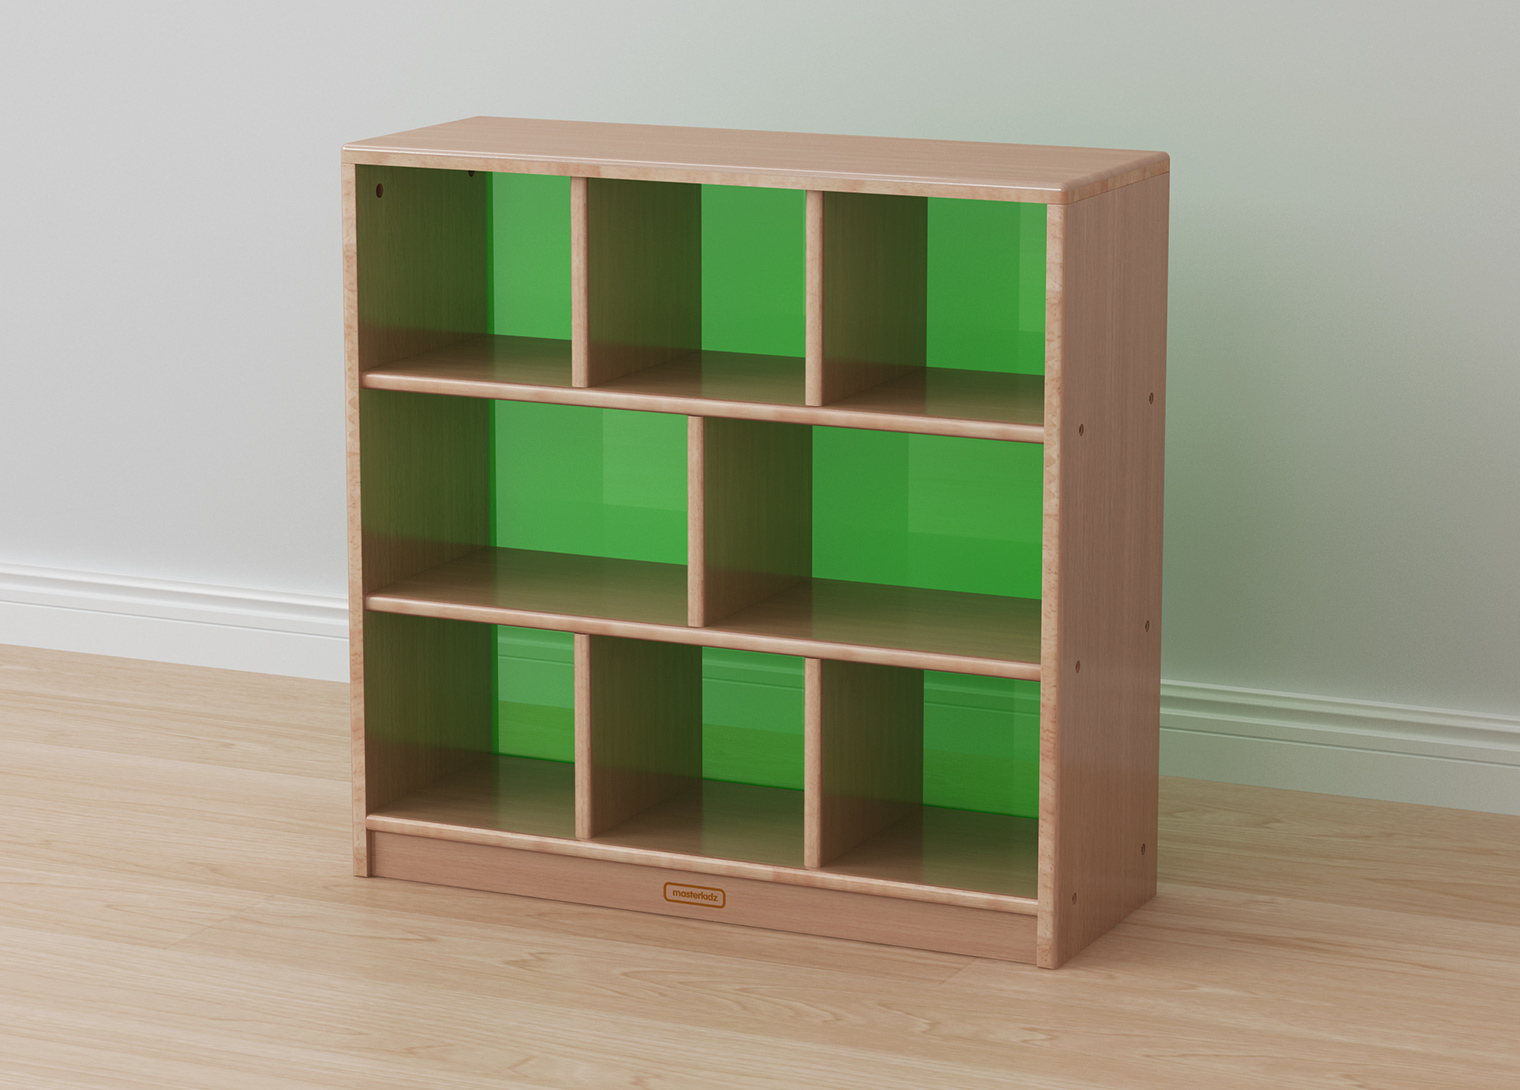 Forest School - 789H x 810L Wooden  8-Compartment Shelving Unit - Translucent Green Back